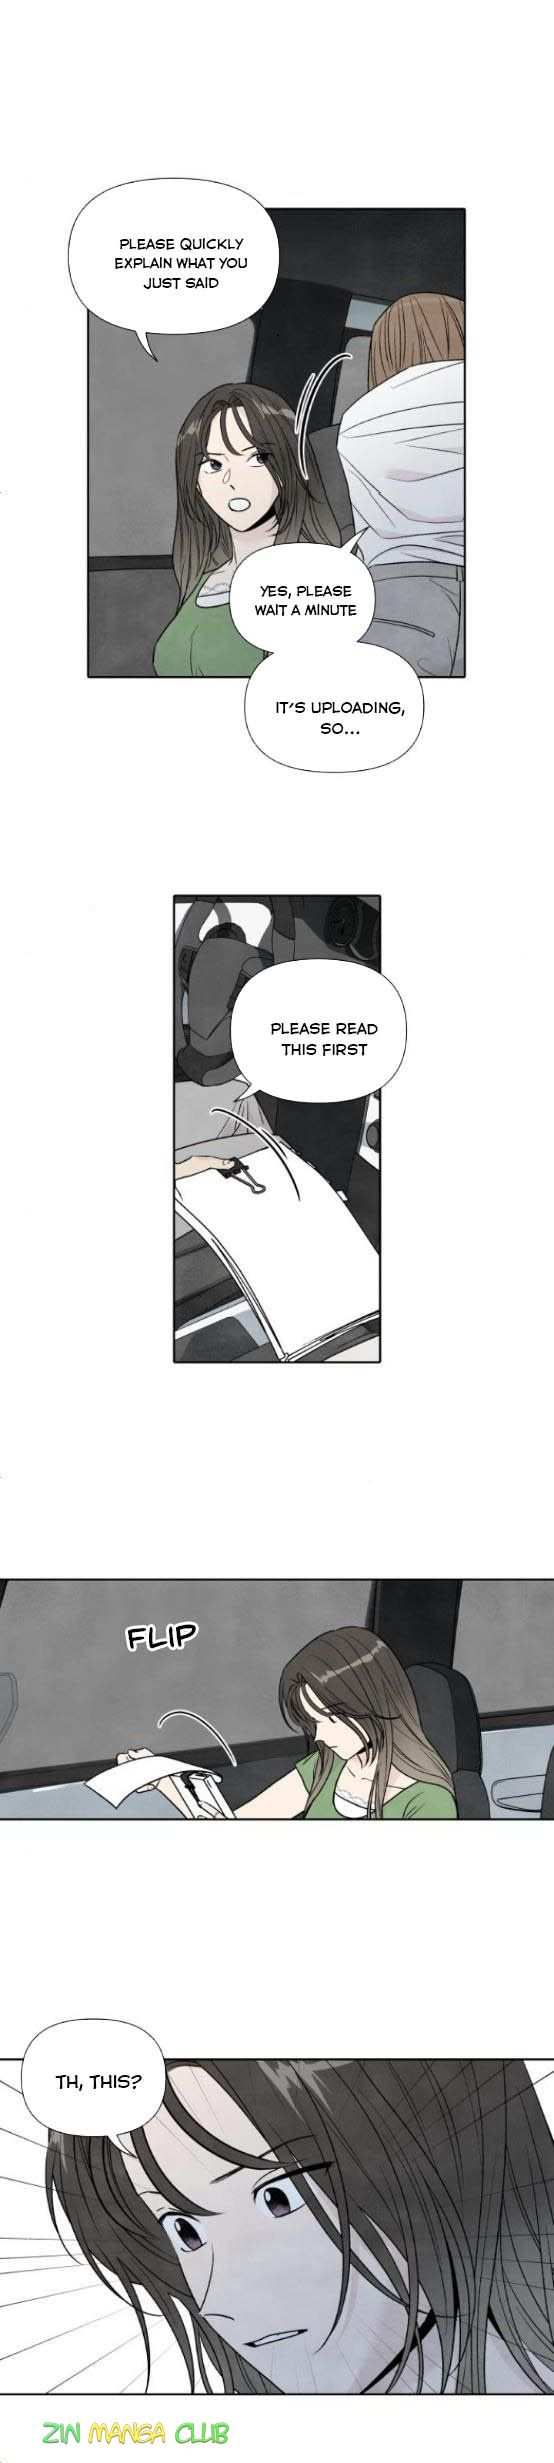 My Reason to Die  - page 6